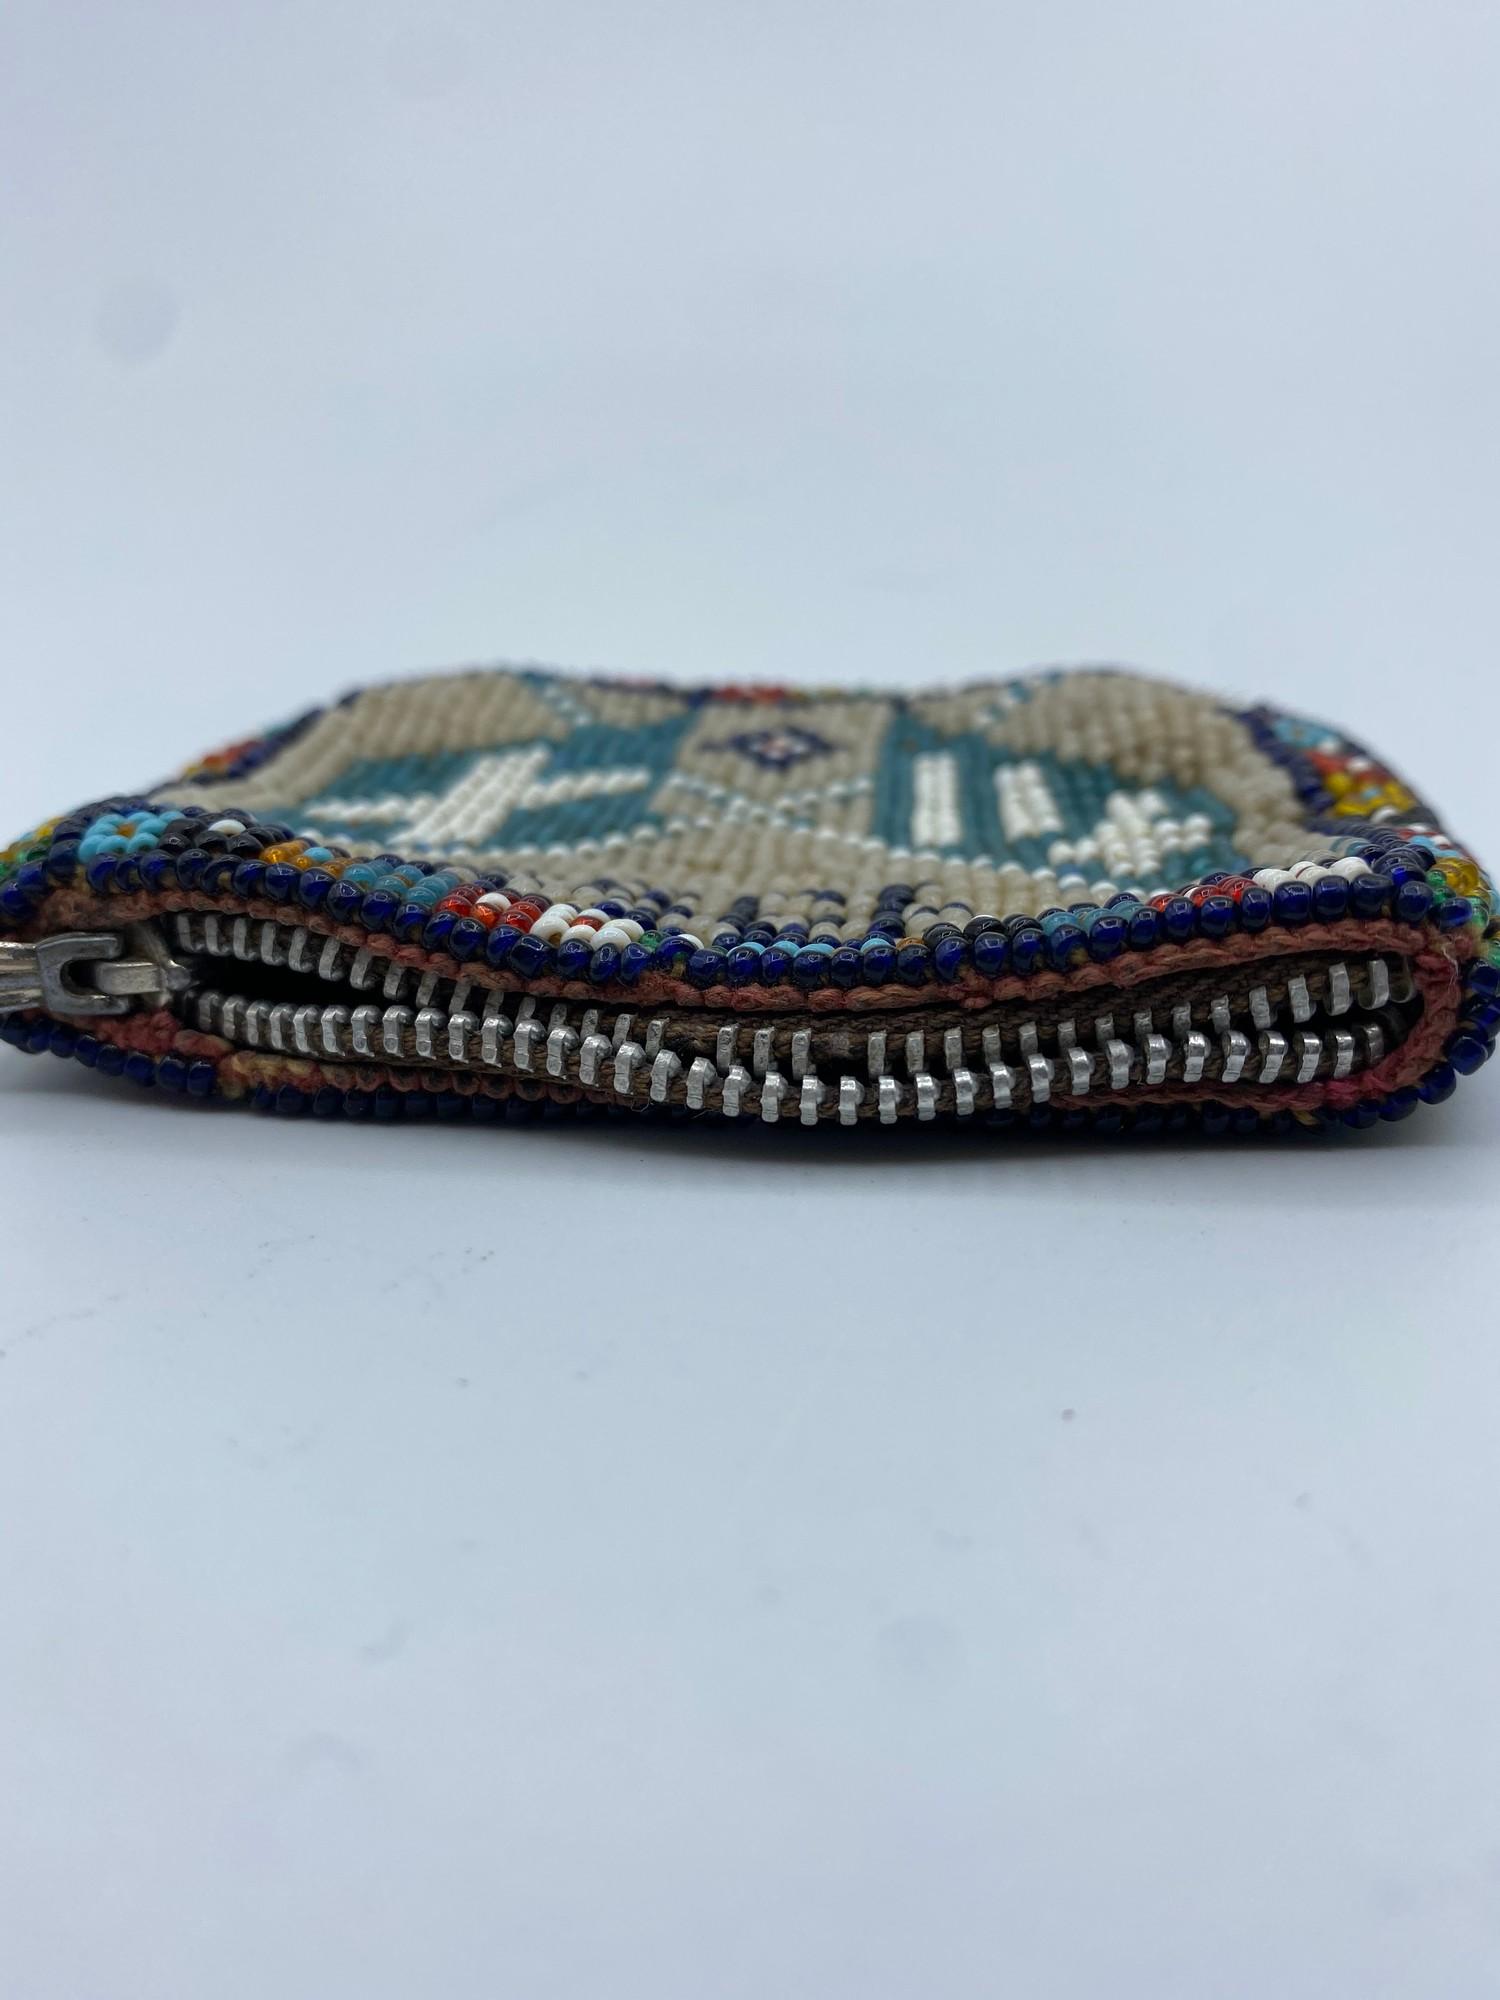 Italian - Nazi Relic. A Bead Work Purse Bearing Italian and Nazi and Flags with a 1939 Date. - Image 20 of 20